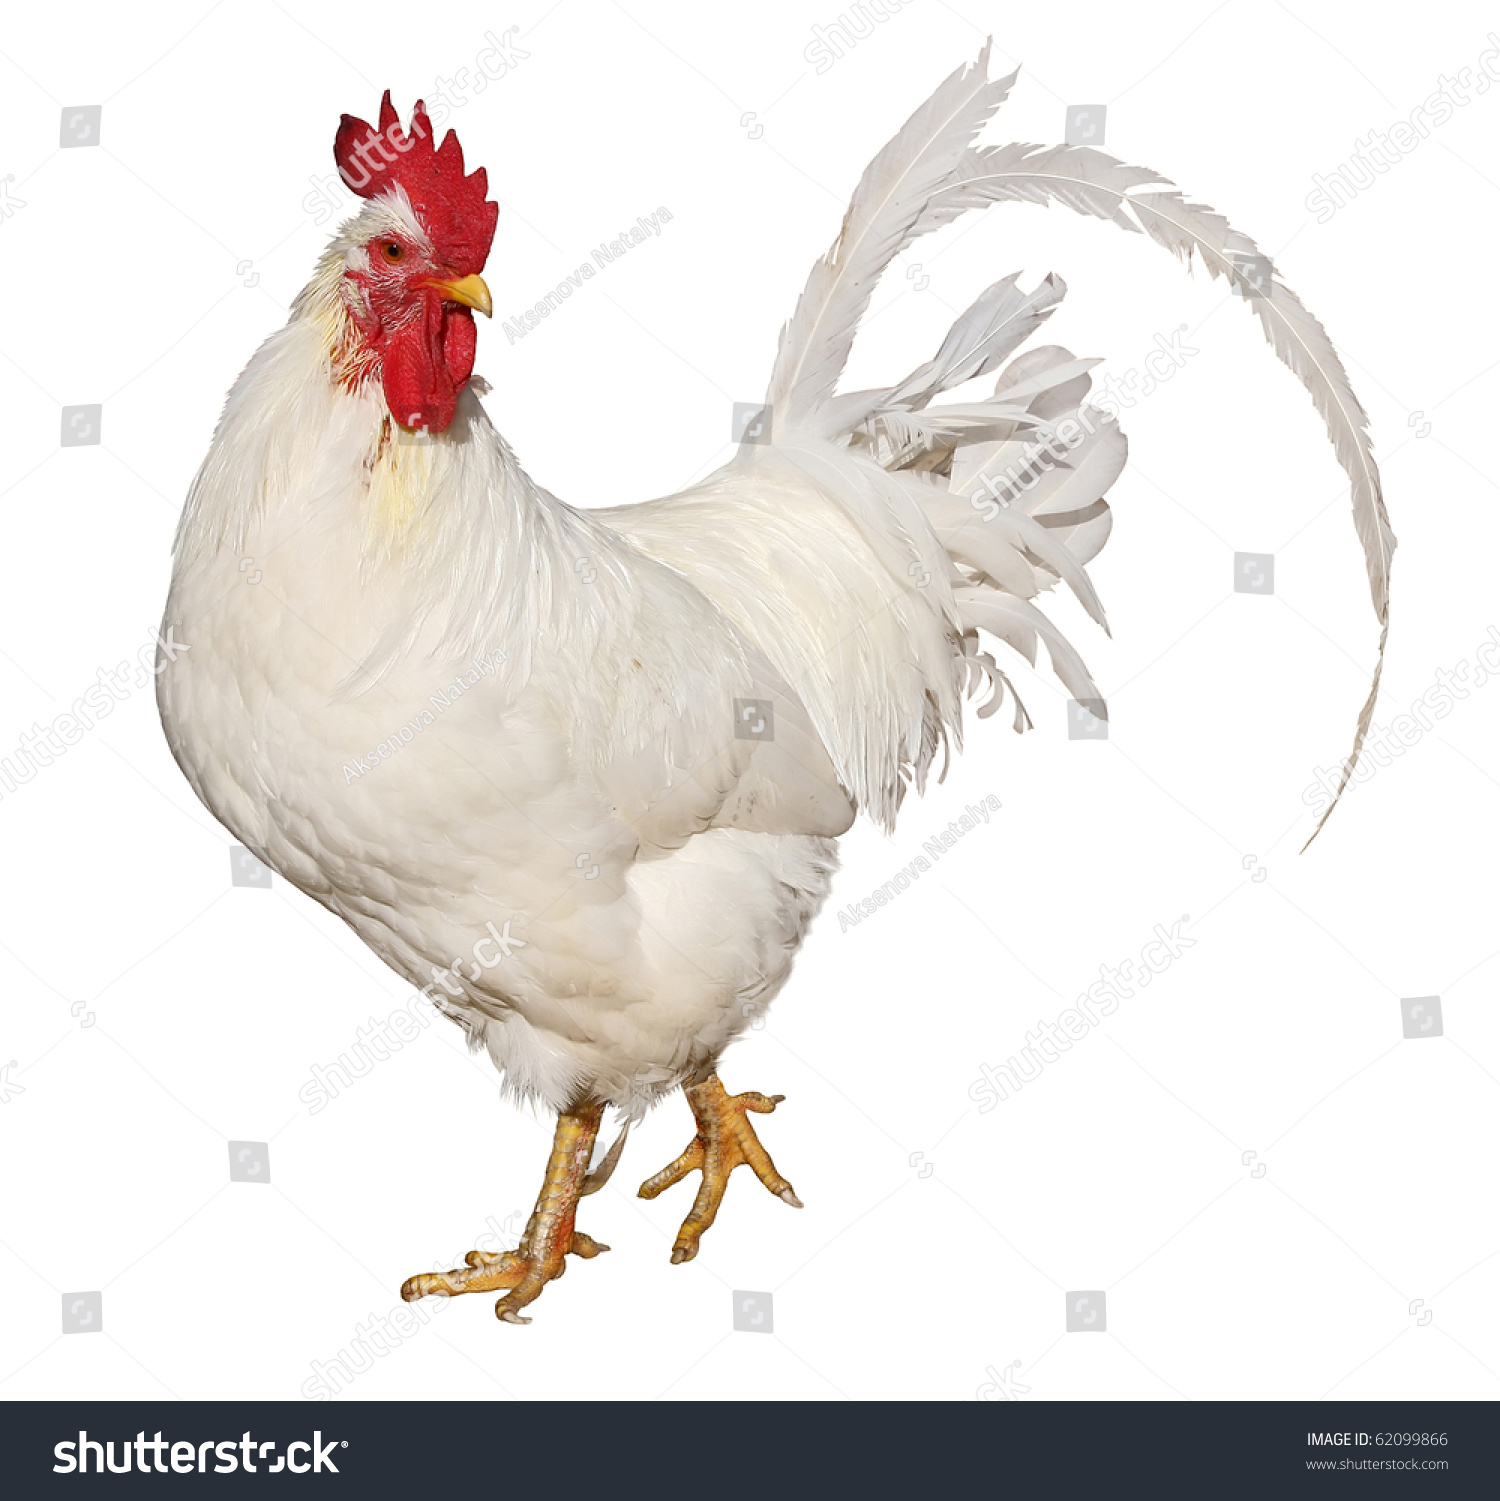 Chicken Isolated On White Background Stock Photo 62099866 - Shutterstock